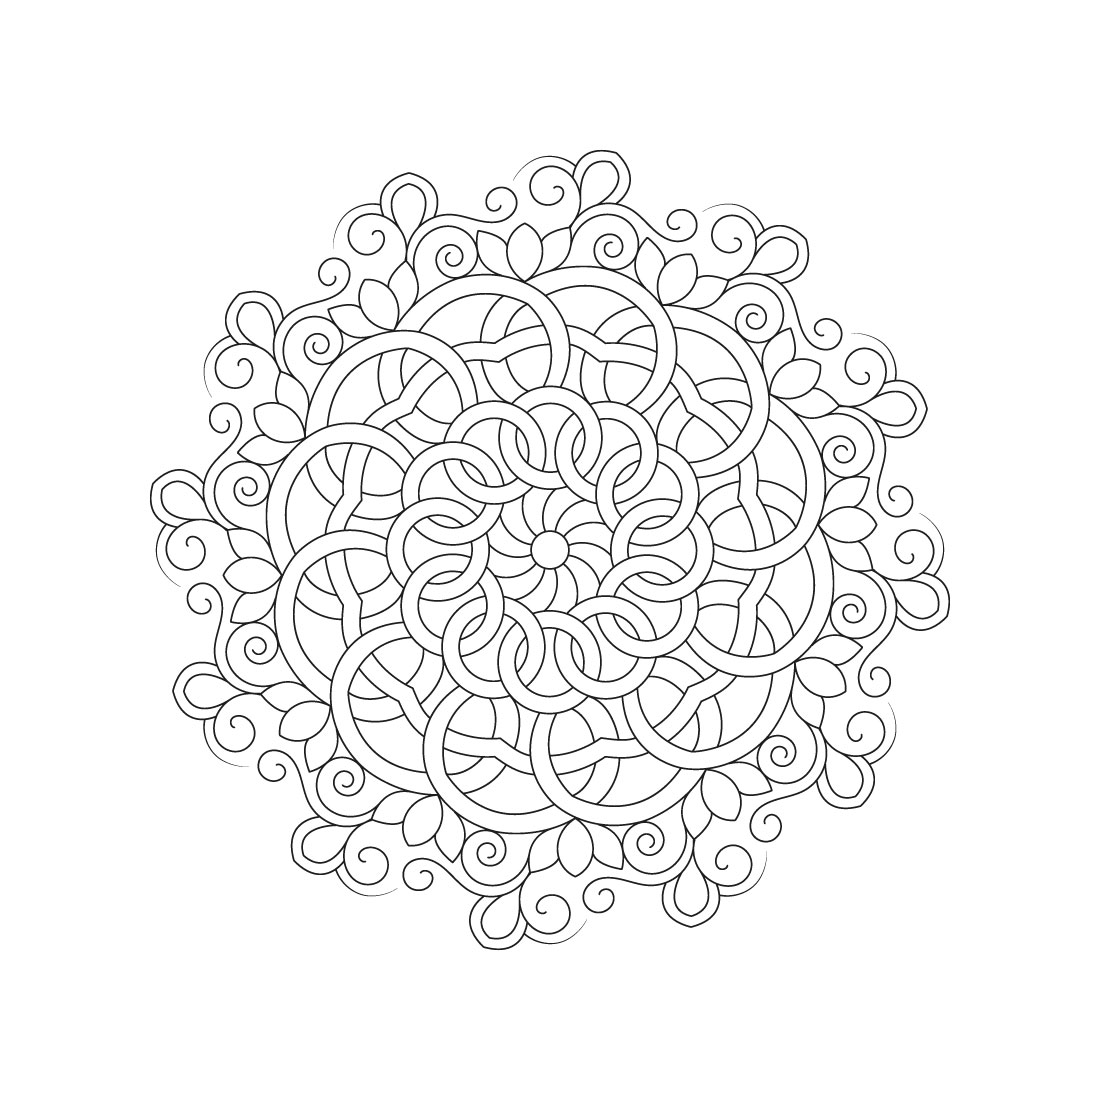 Bundle of 10 Sunlit Mandala for KDP Colouring Book interior Pages preview image.